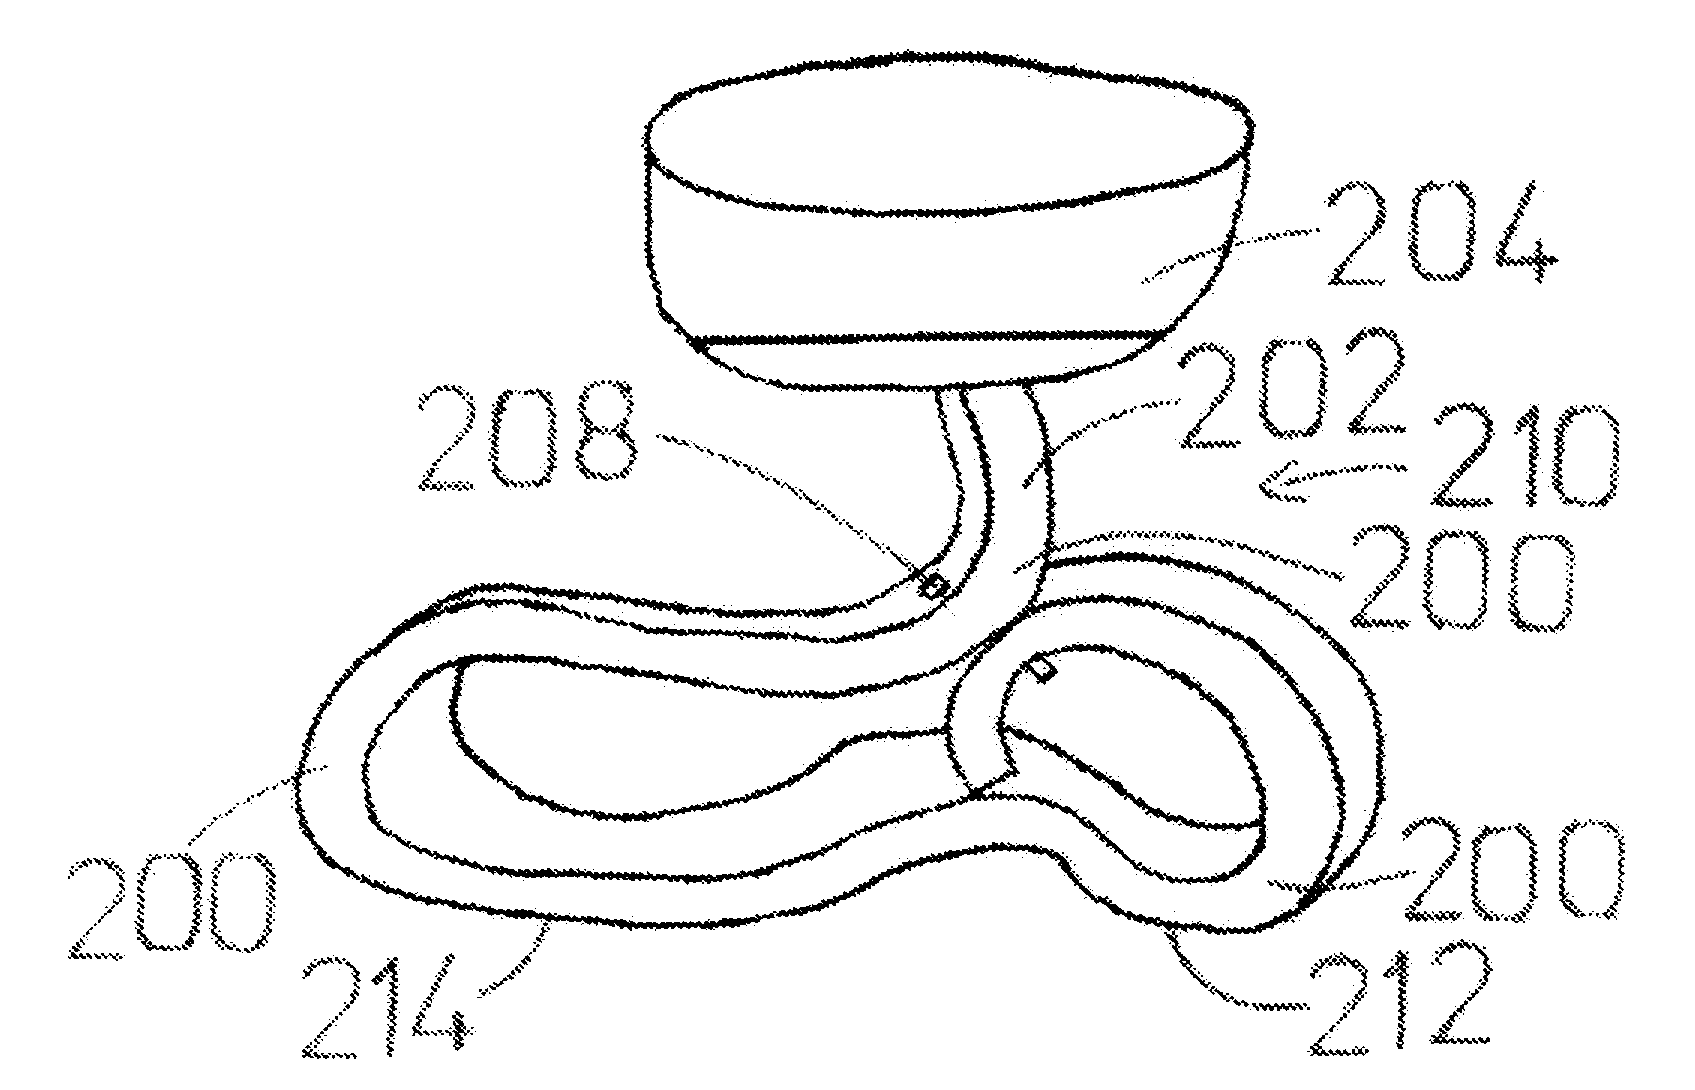 Method of fabricating, artificial limbs incorporating superelastic supports